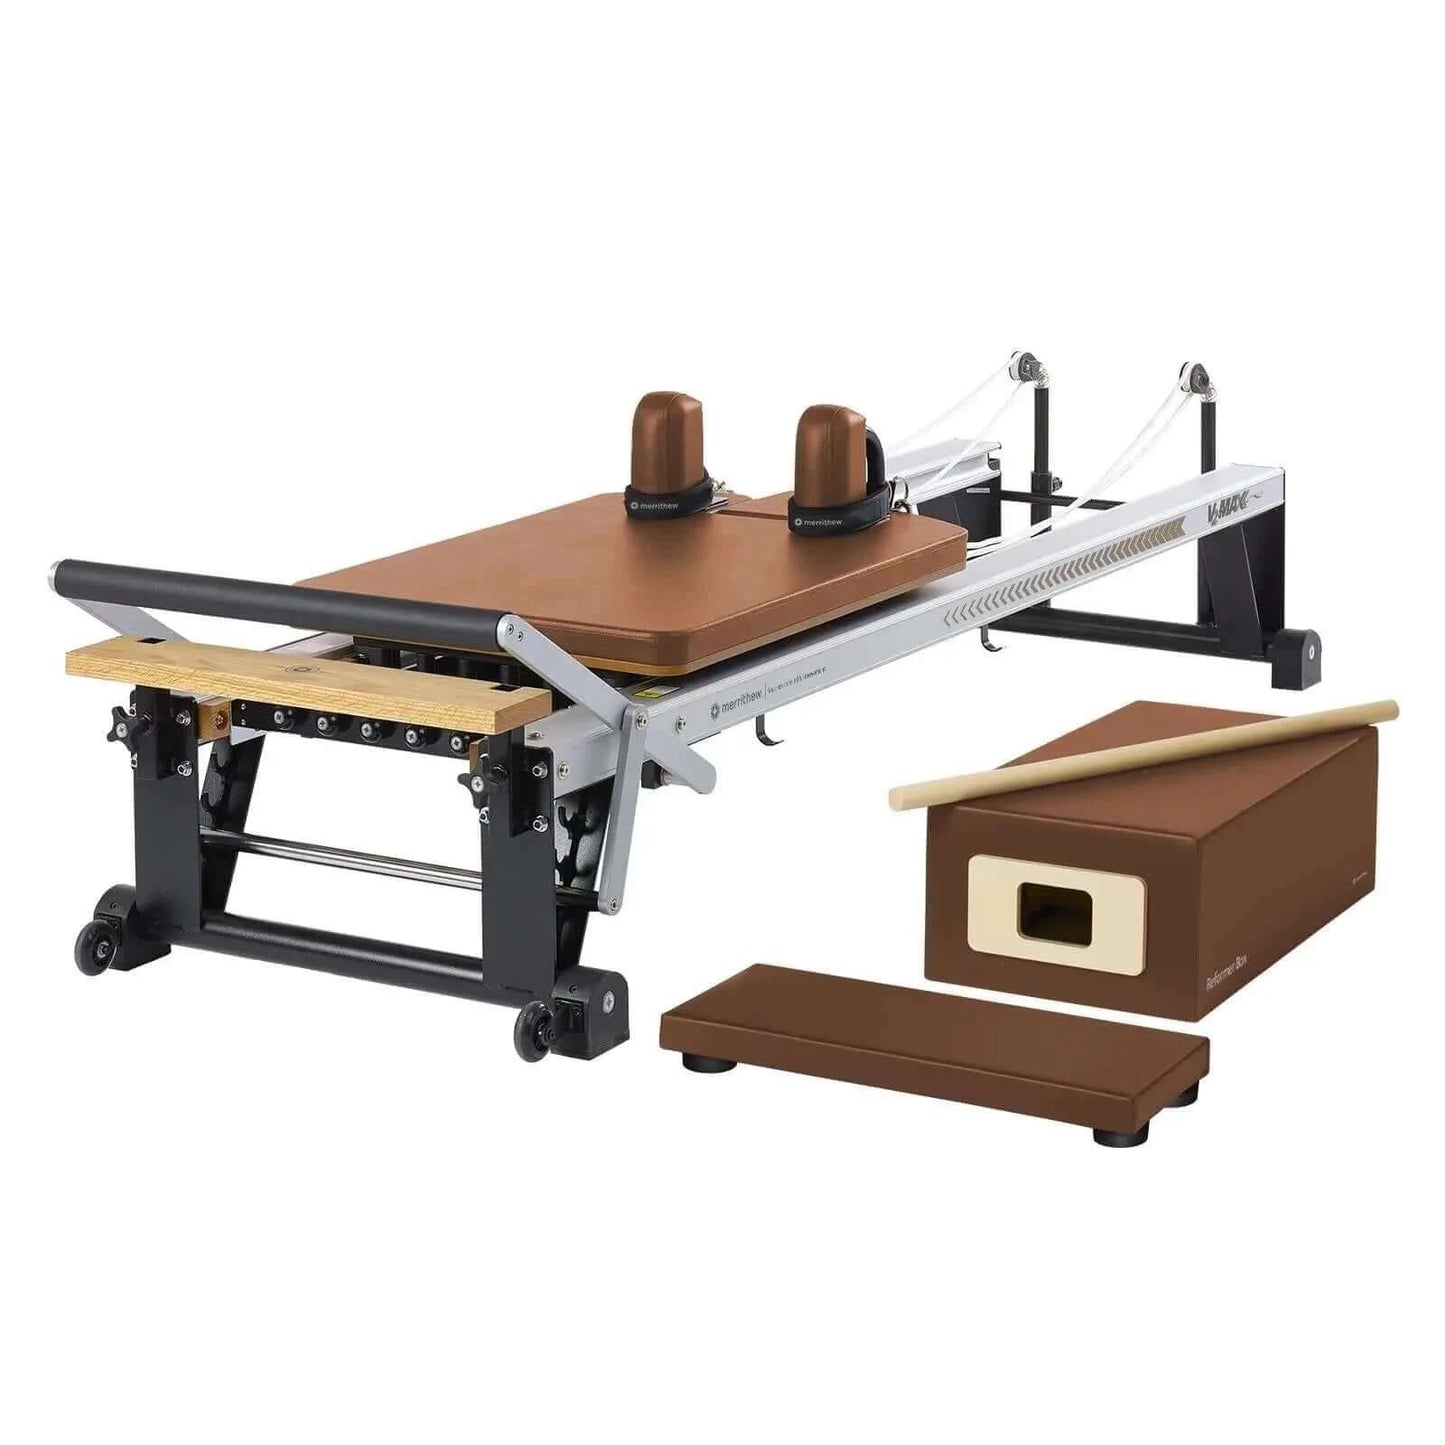 Sierra Brick Merrithew™ Pilates At Home V2 Max™ Reformer Package by Merrithew™ sold by Pilates Matters® by BSP LLC